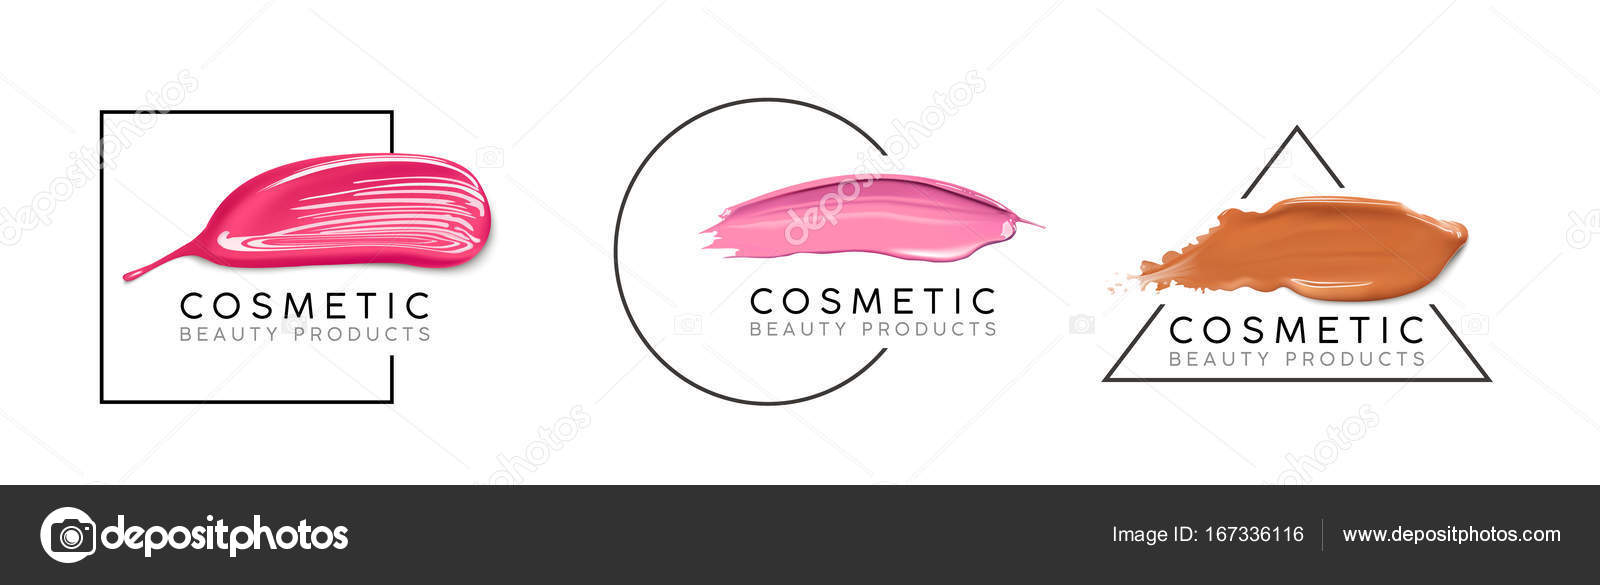 Makeup Design Template With Place For